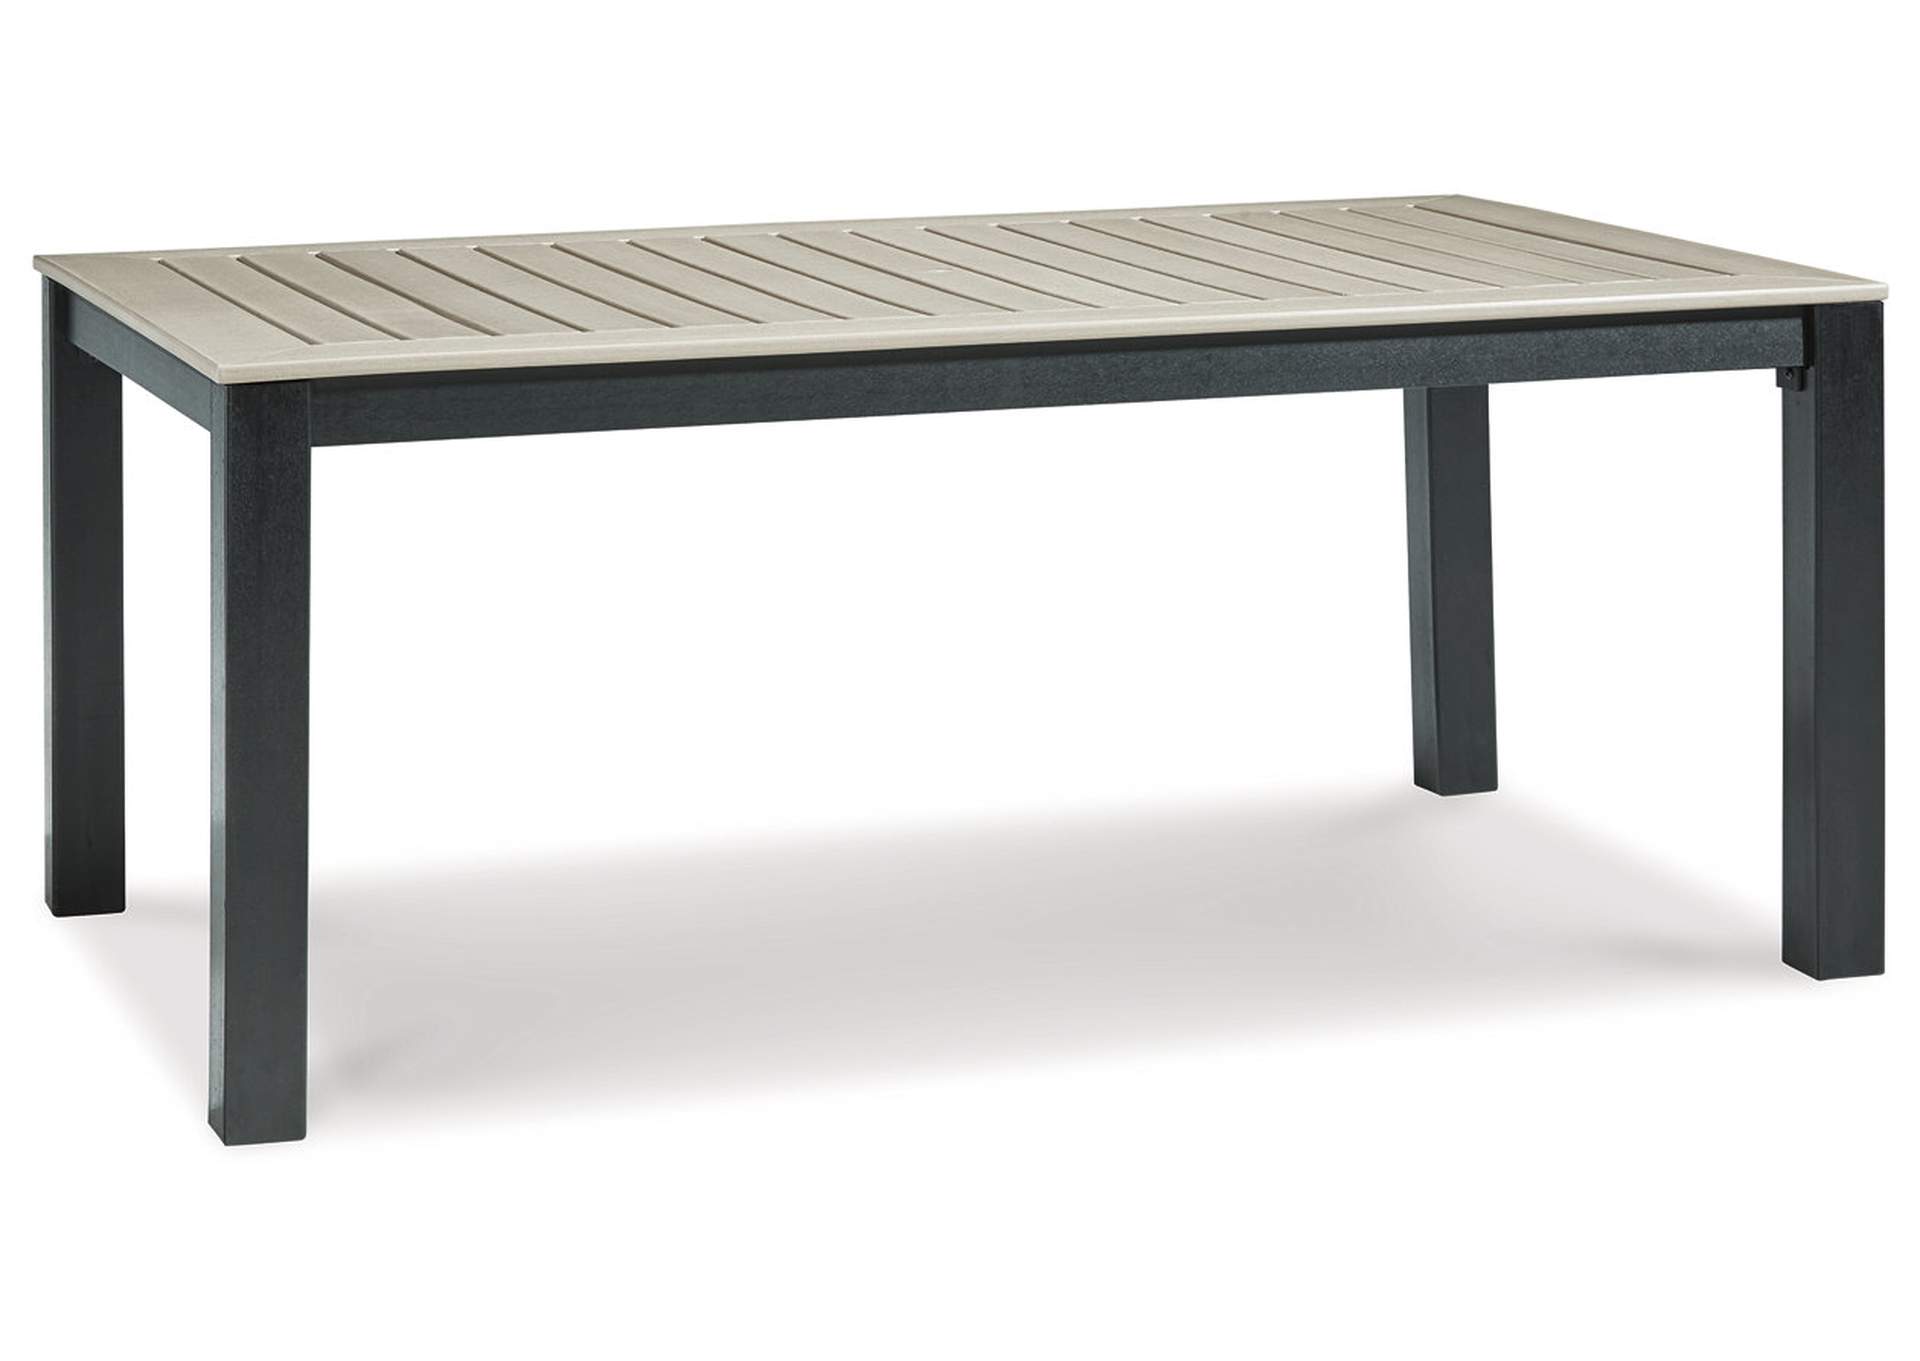 MOUNT VALLEY Outdoor Dining Table,Outdoor By Ashley